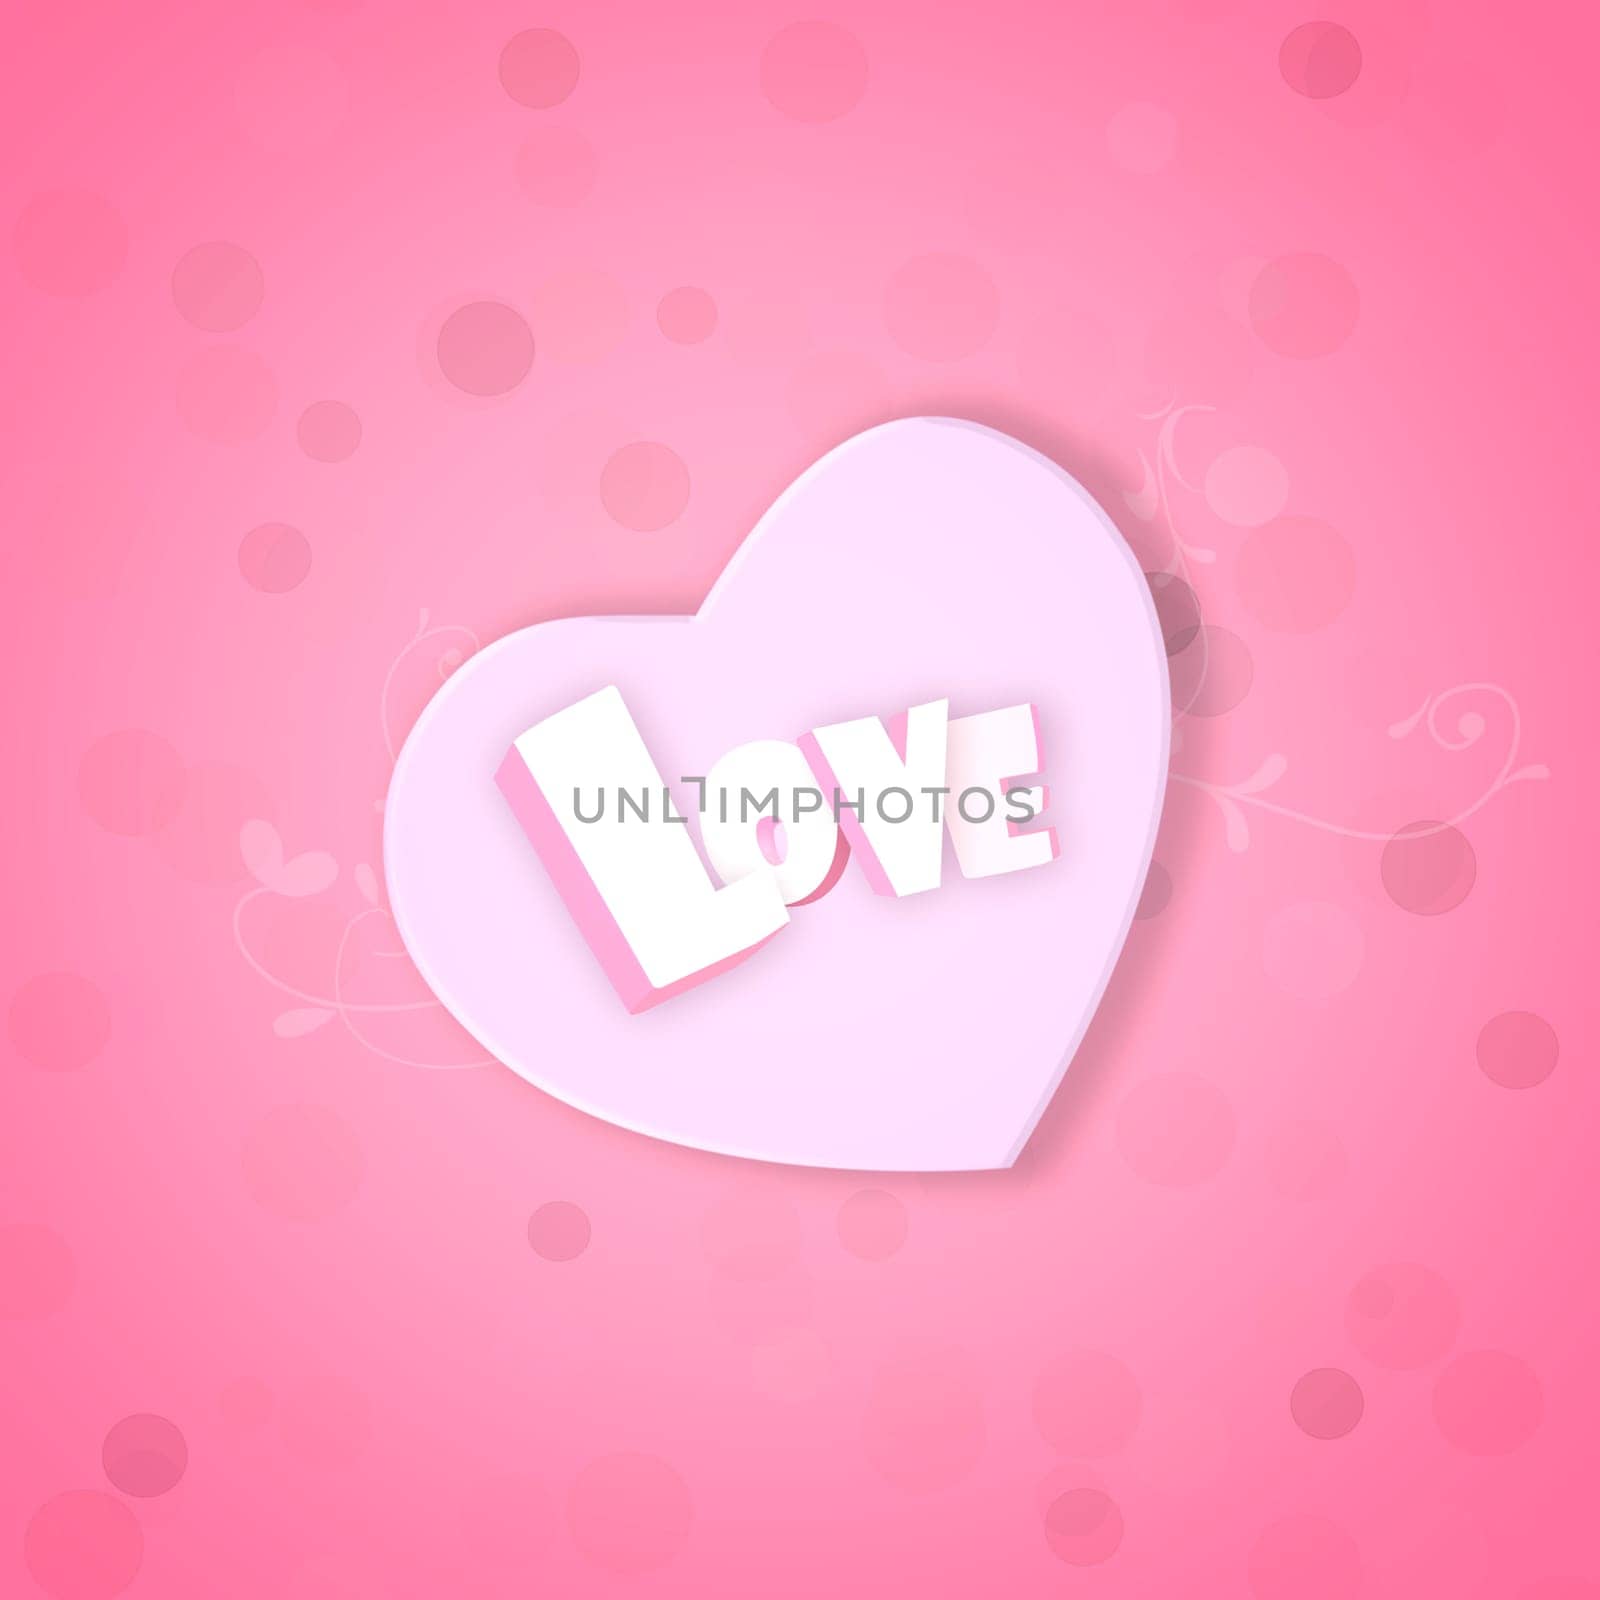 Graphic, words and hearts for symbol of love for support, valentines day and mockup space in studio. Pink background, icons or illustration of a creative wallpaper for care, text design or romance.